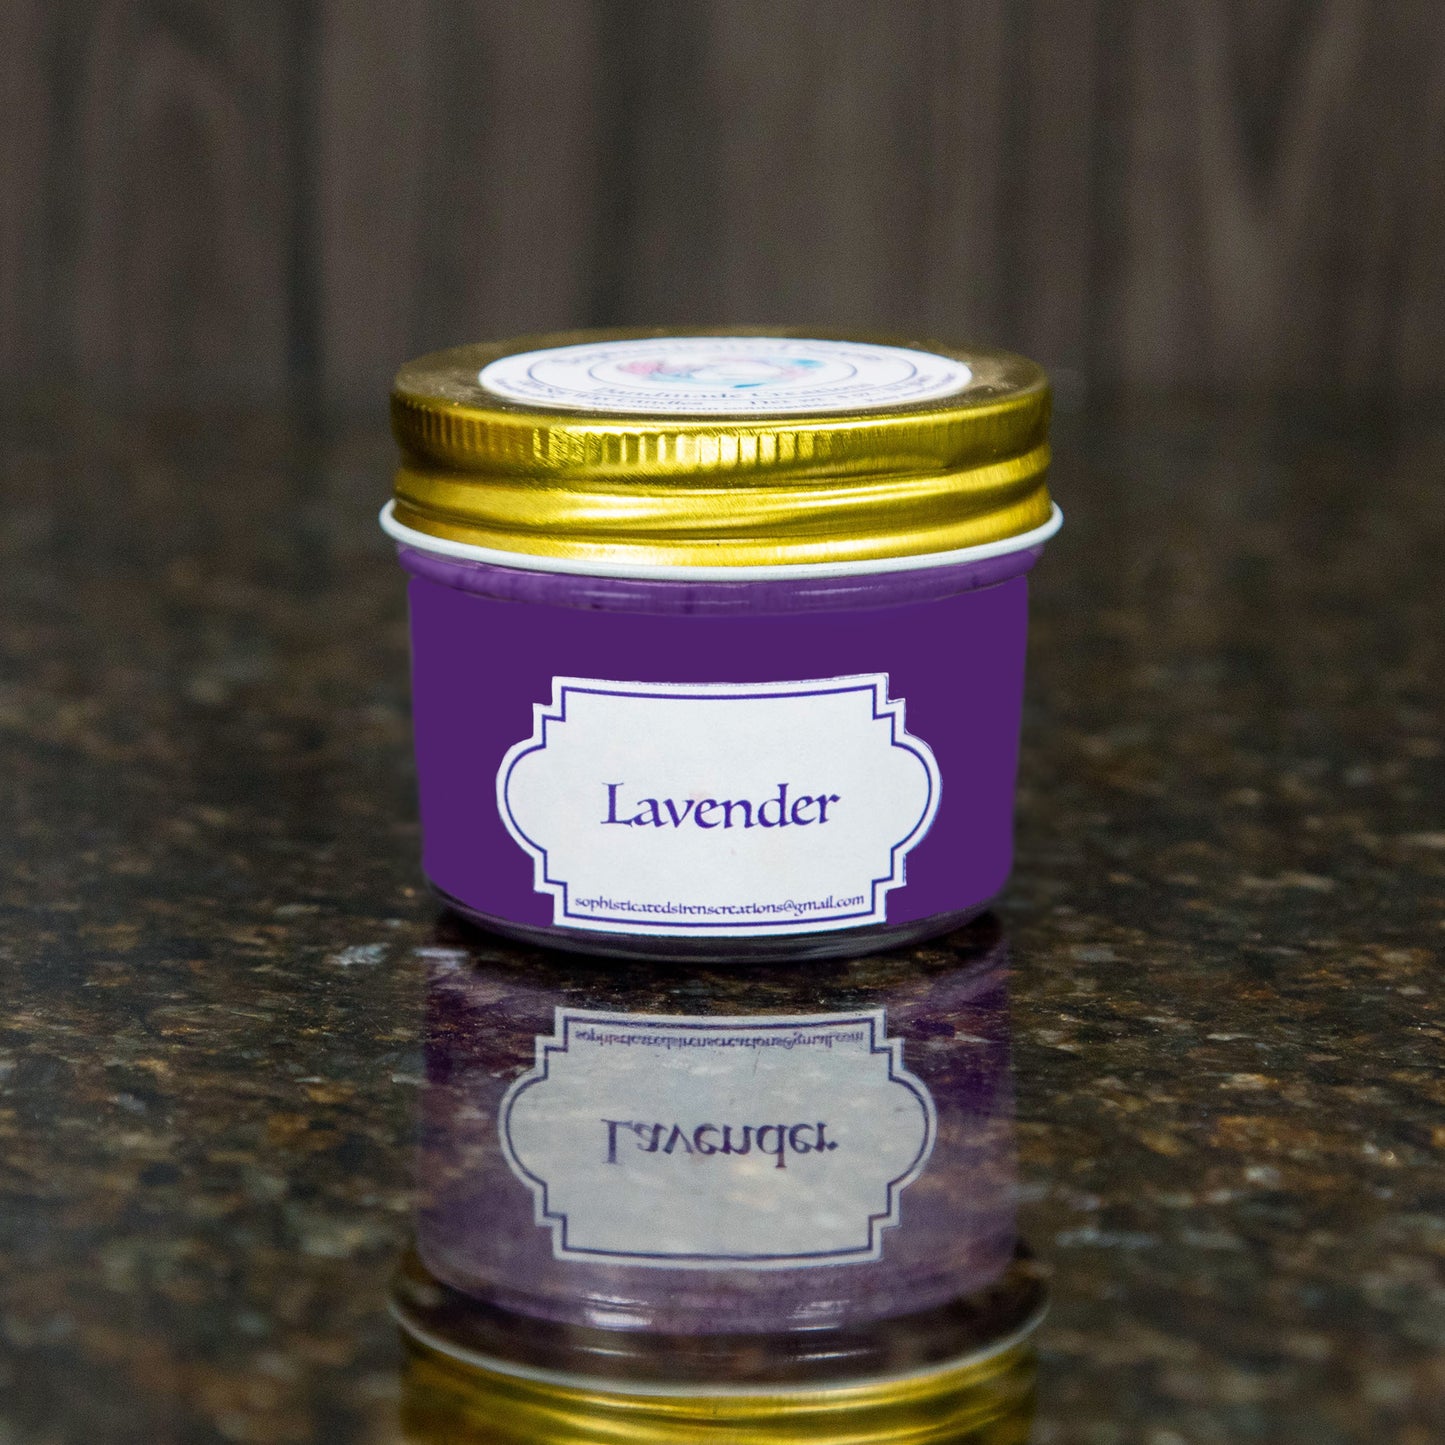 a purple candle with a gold lid and a label that reads "lavender"